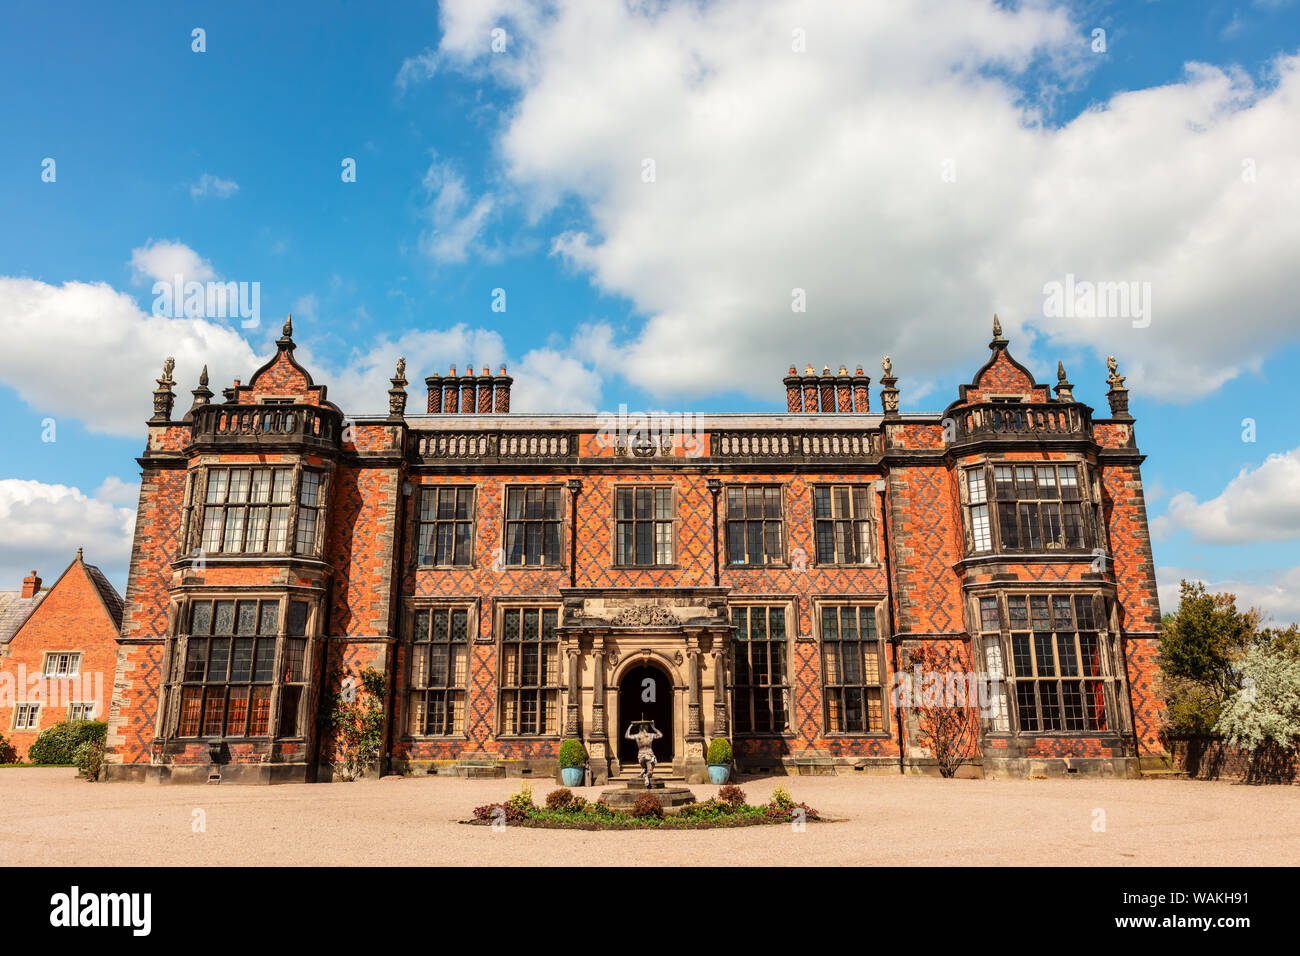 Historic building of Arley Hall in Cheshire, England. Stock Photo